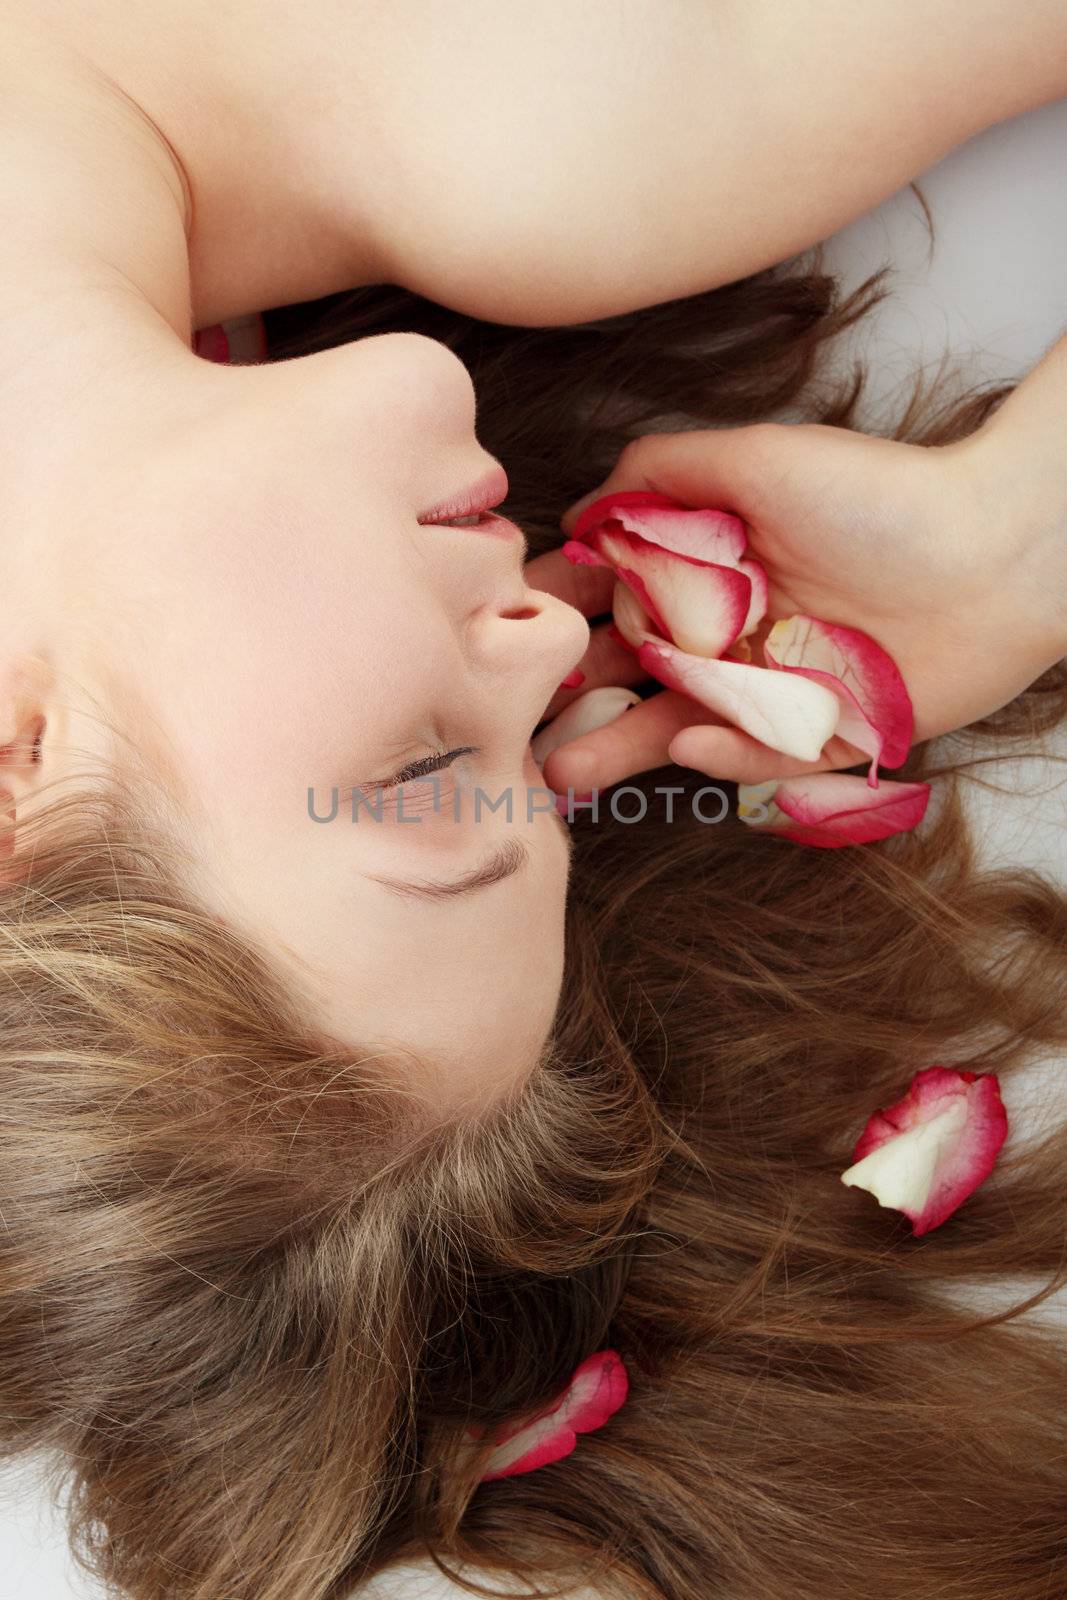 Close-up of beautiful young woman face with long blond hair and rose-petal